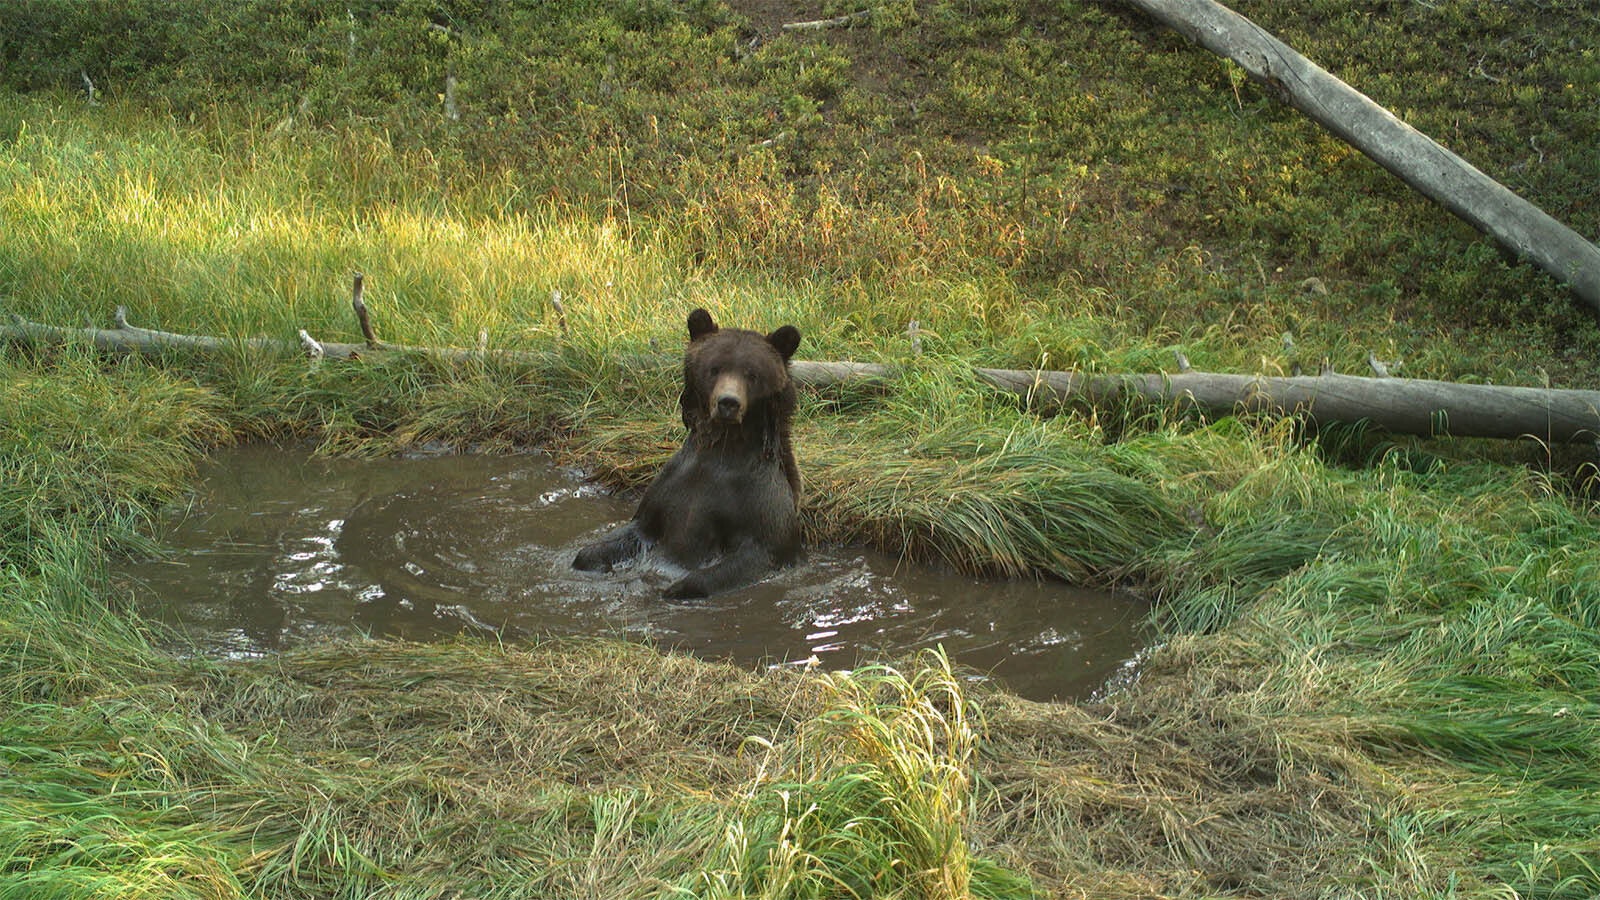 Bears don’t sweat, so they must use small pools in isolated parts of Yellowstone National Park to cool off during the summer.